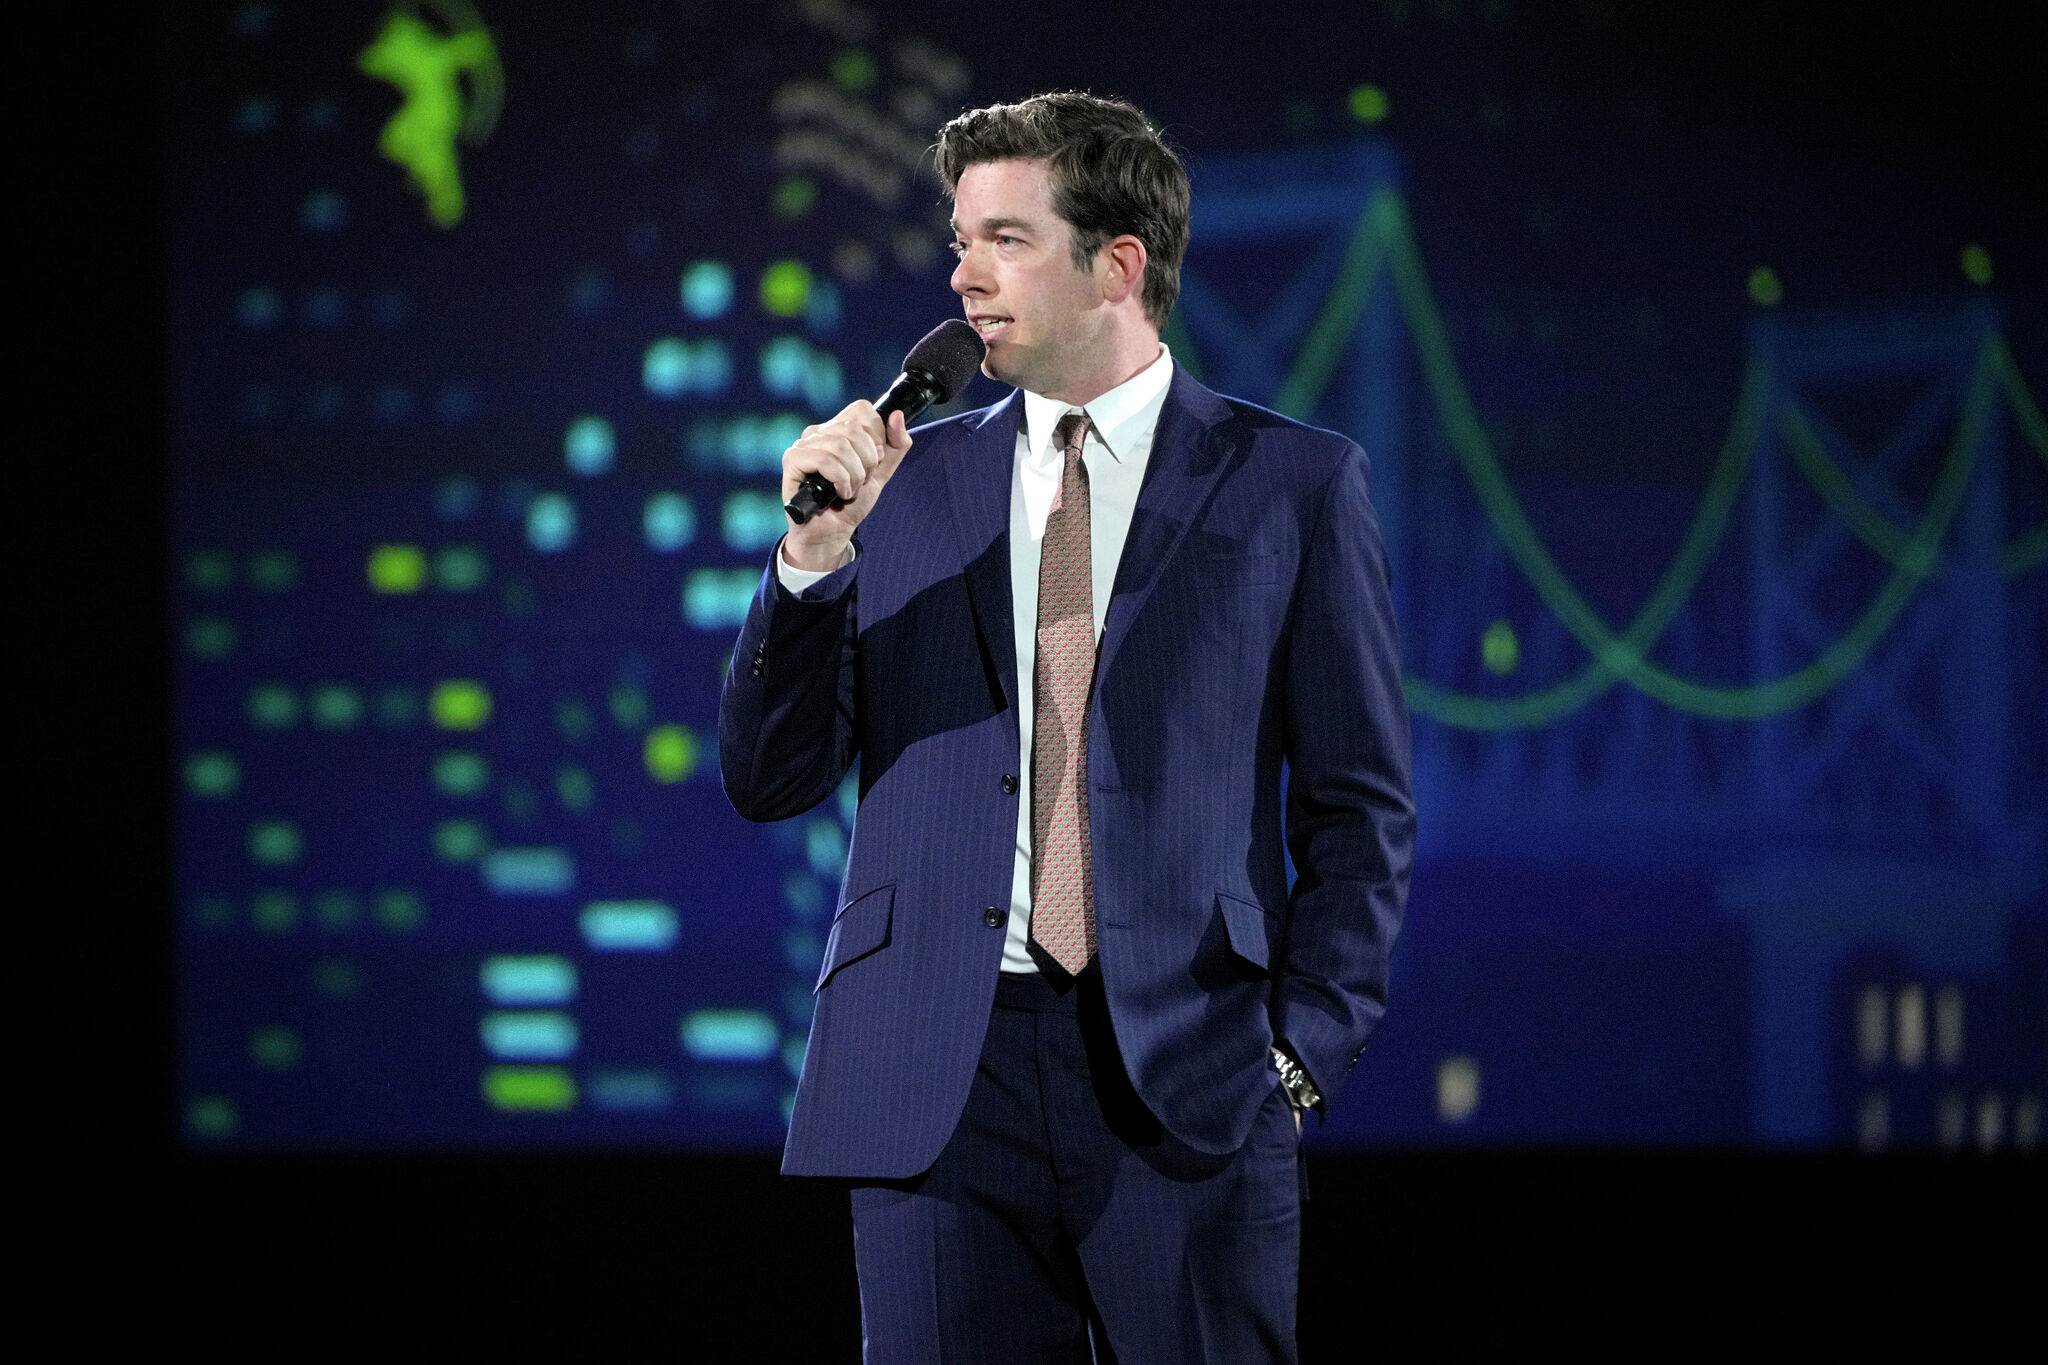 John Mulaney is coming to New Haven tonight. Here is what you need to know.